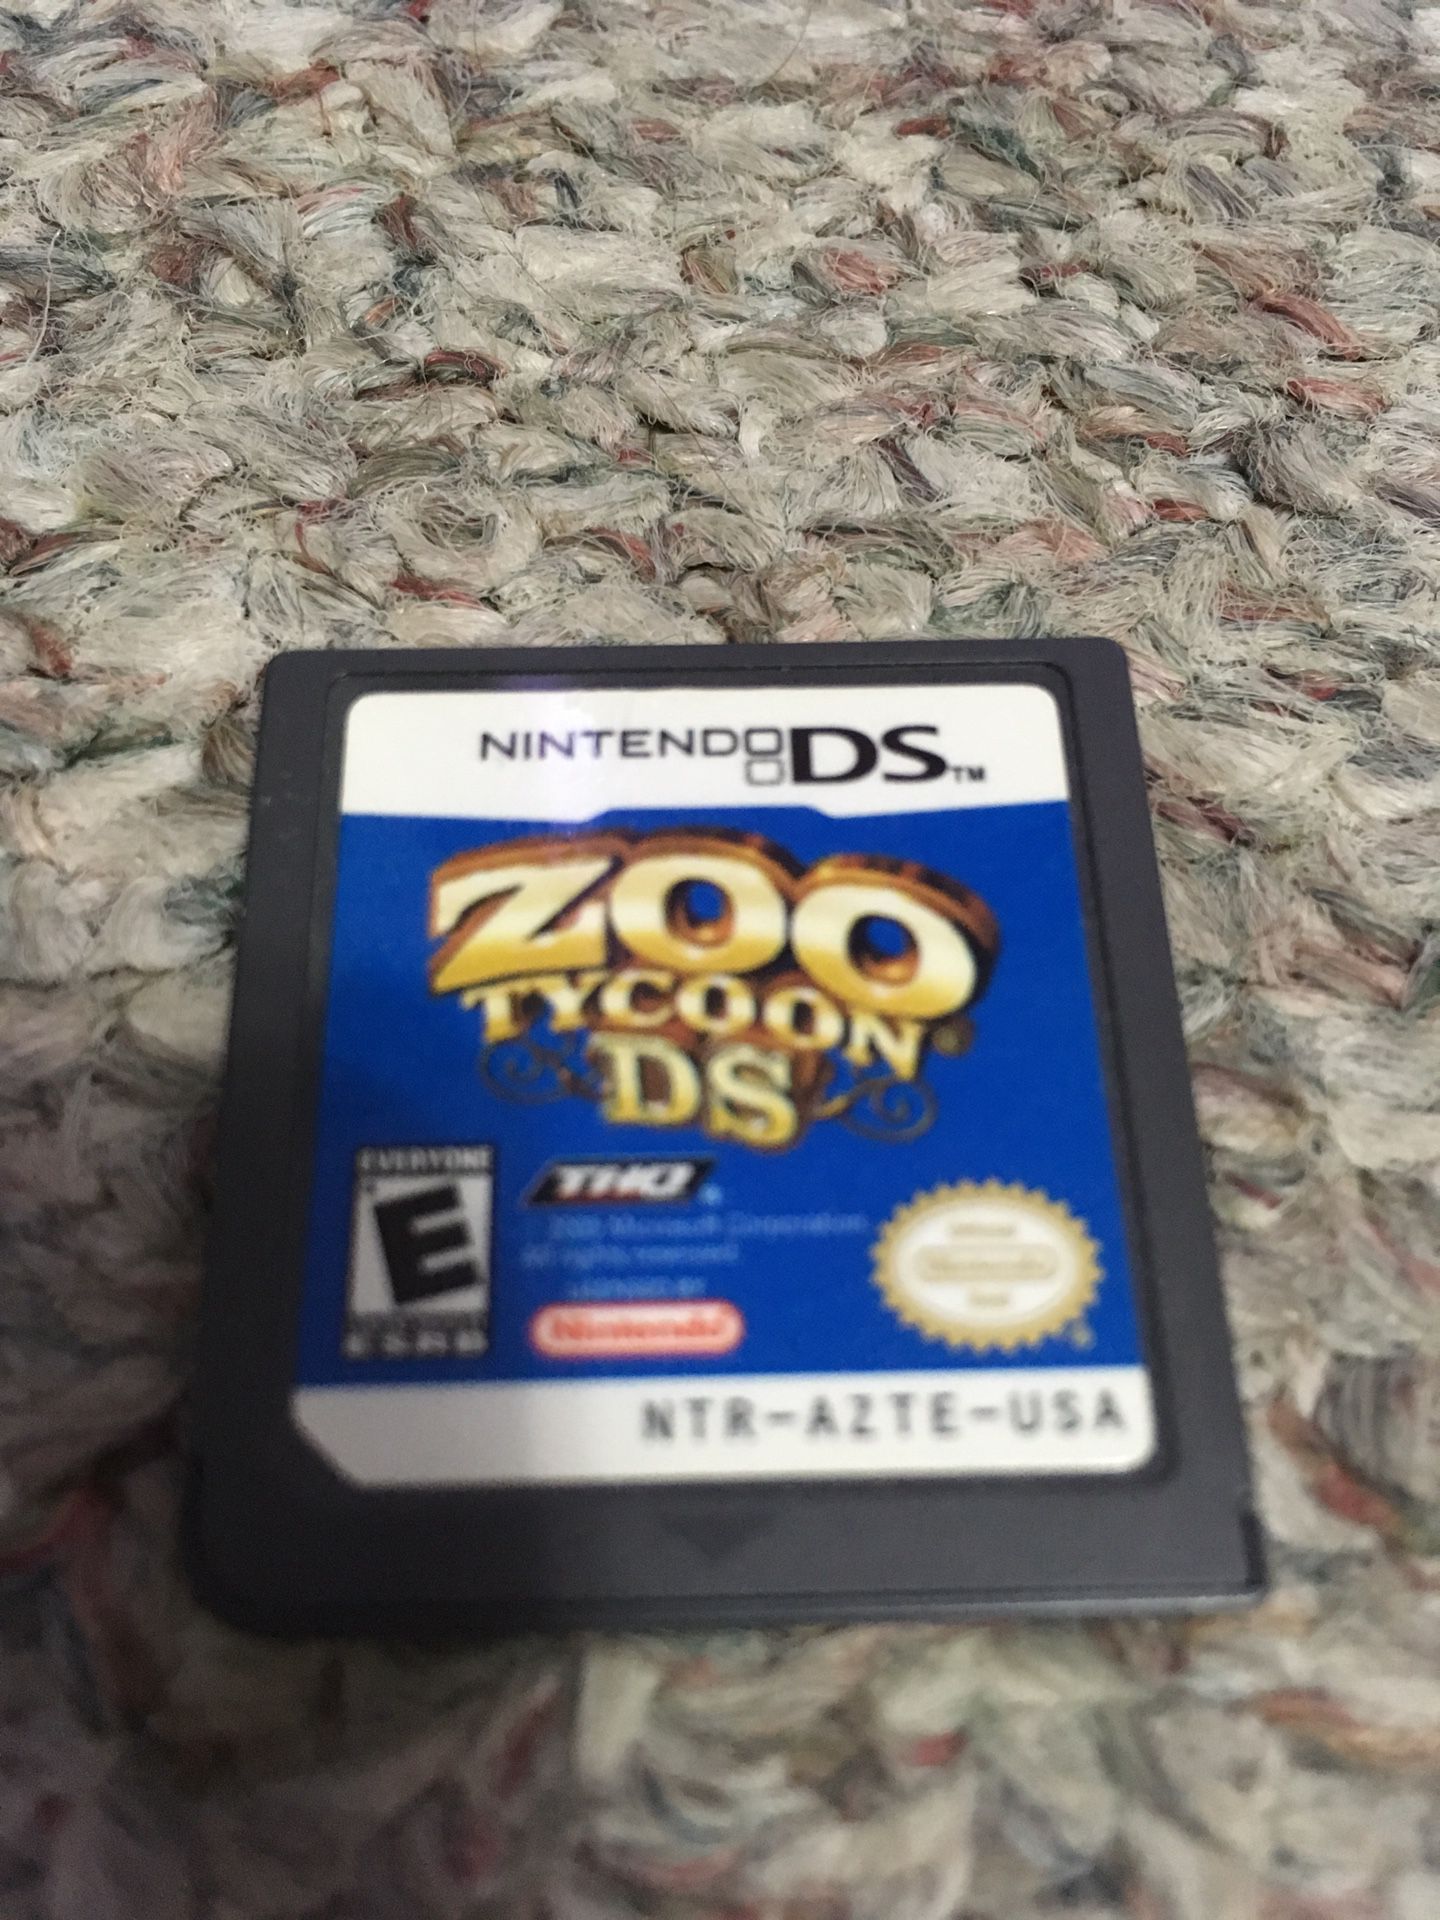 $5 Each Game, or all 3 Nintendo DS Games for $10